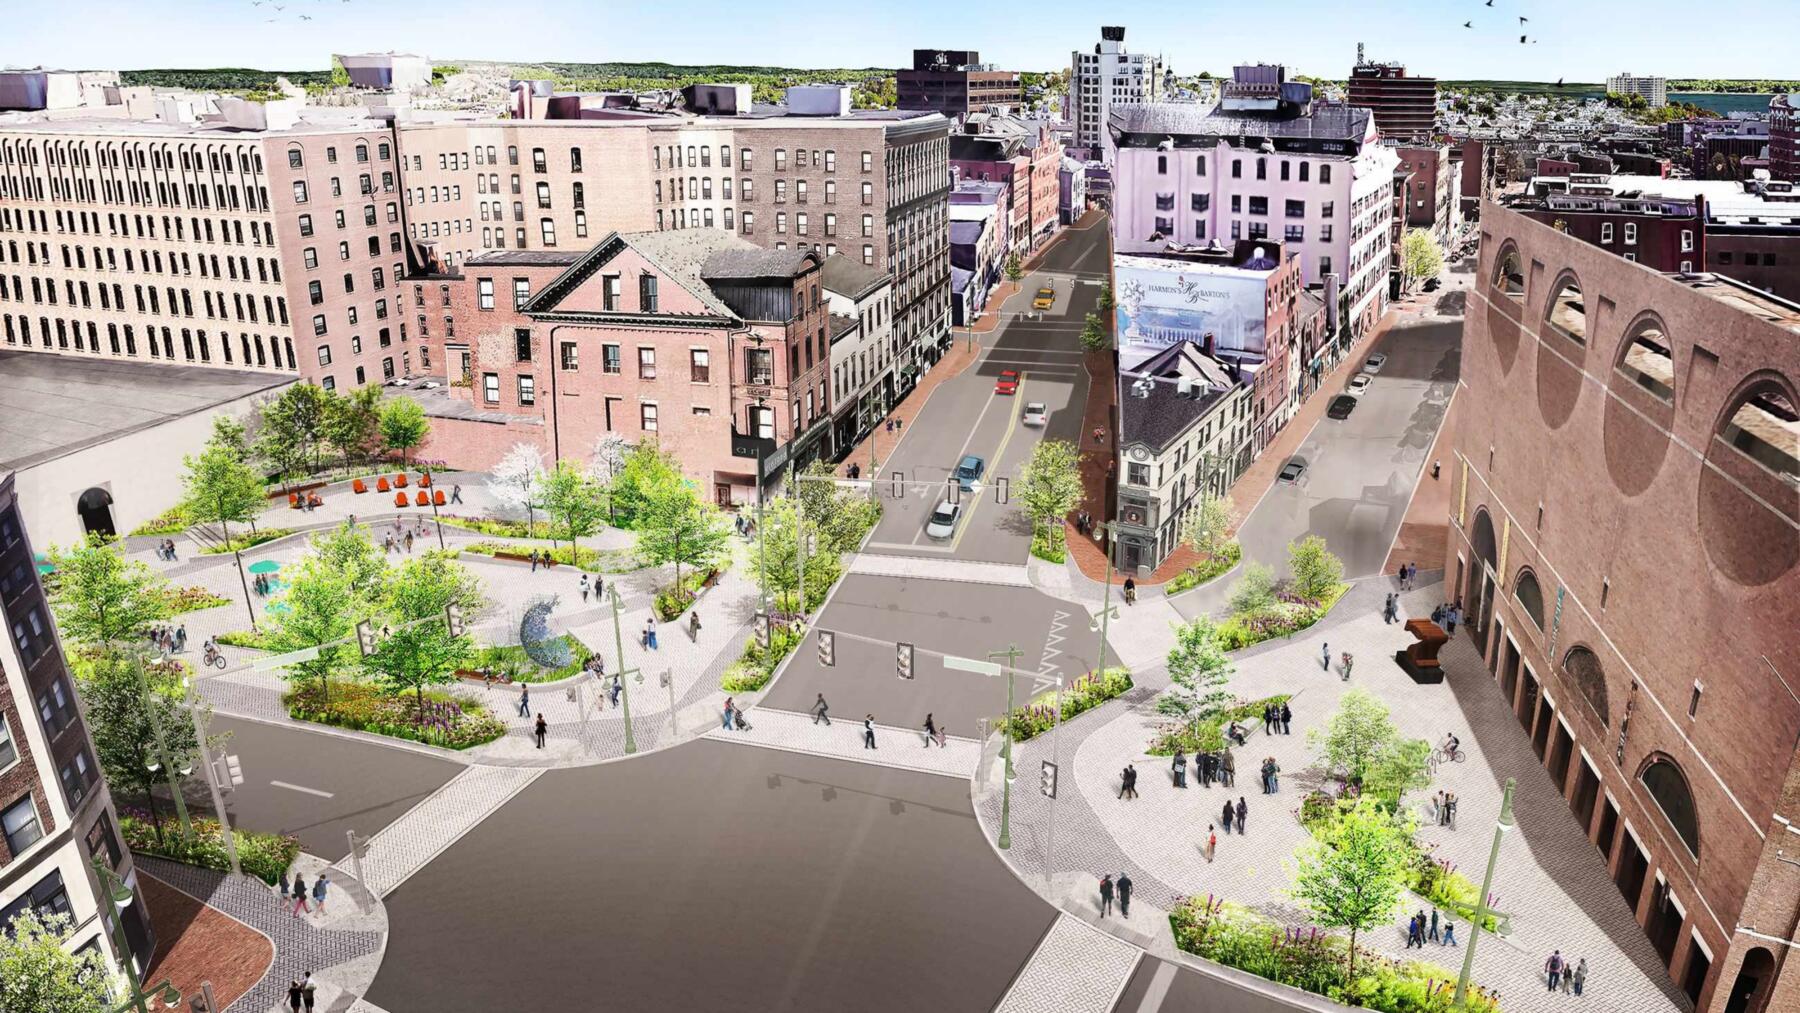 Rendering Courtesy of Congress Square Redesign